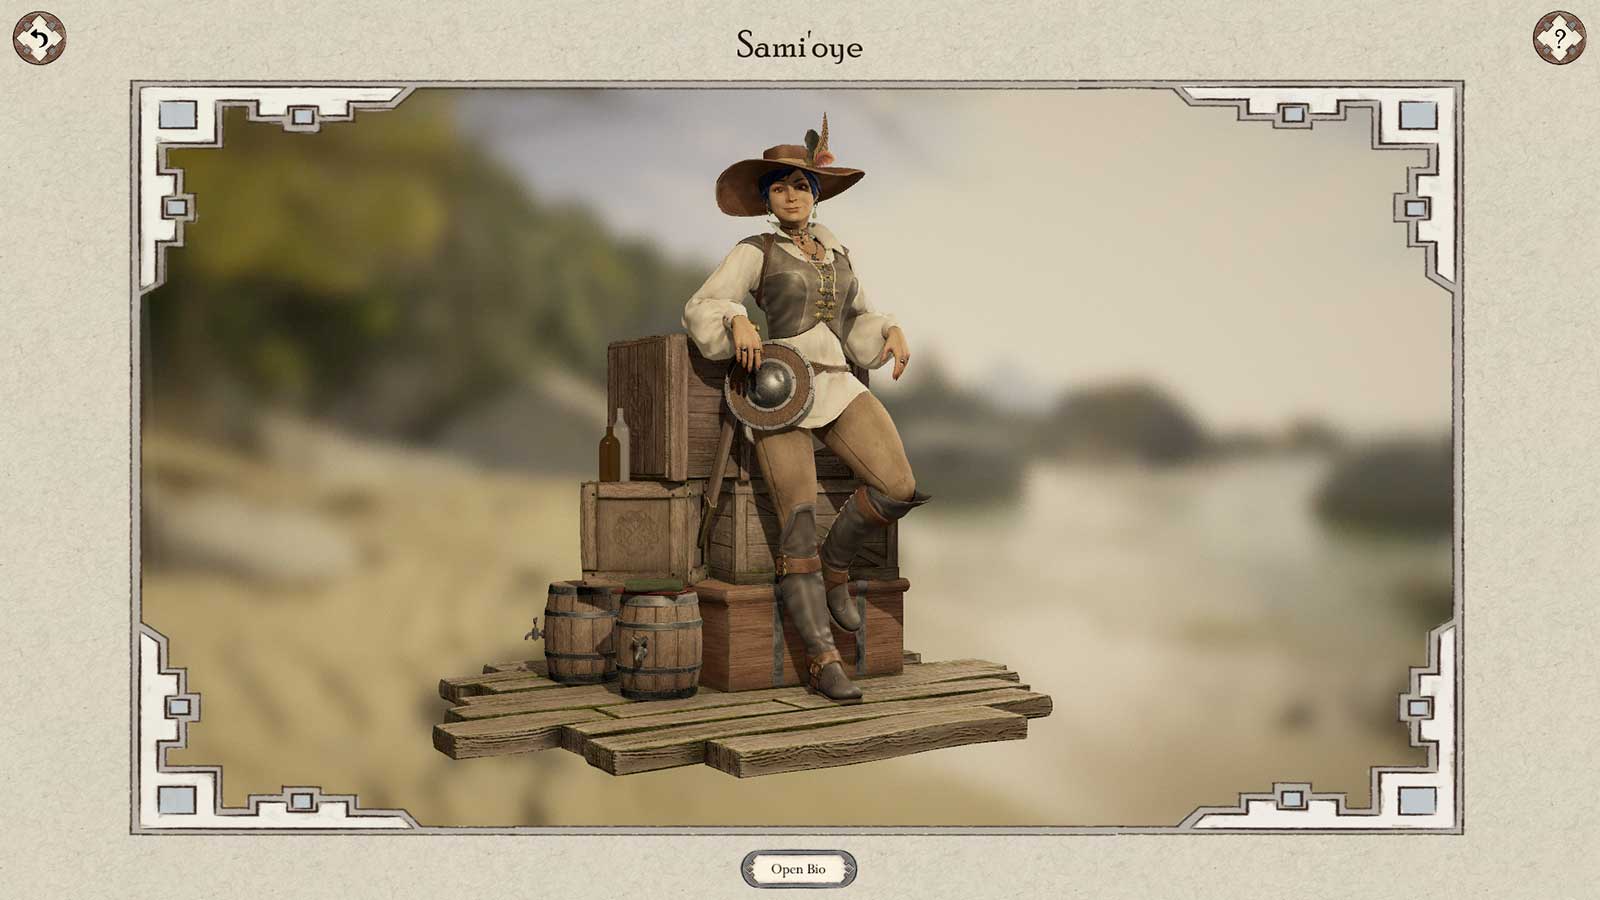 A 3D model of a hat-wearing woman with a sword and shield resting on a pile of crates.